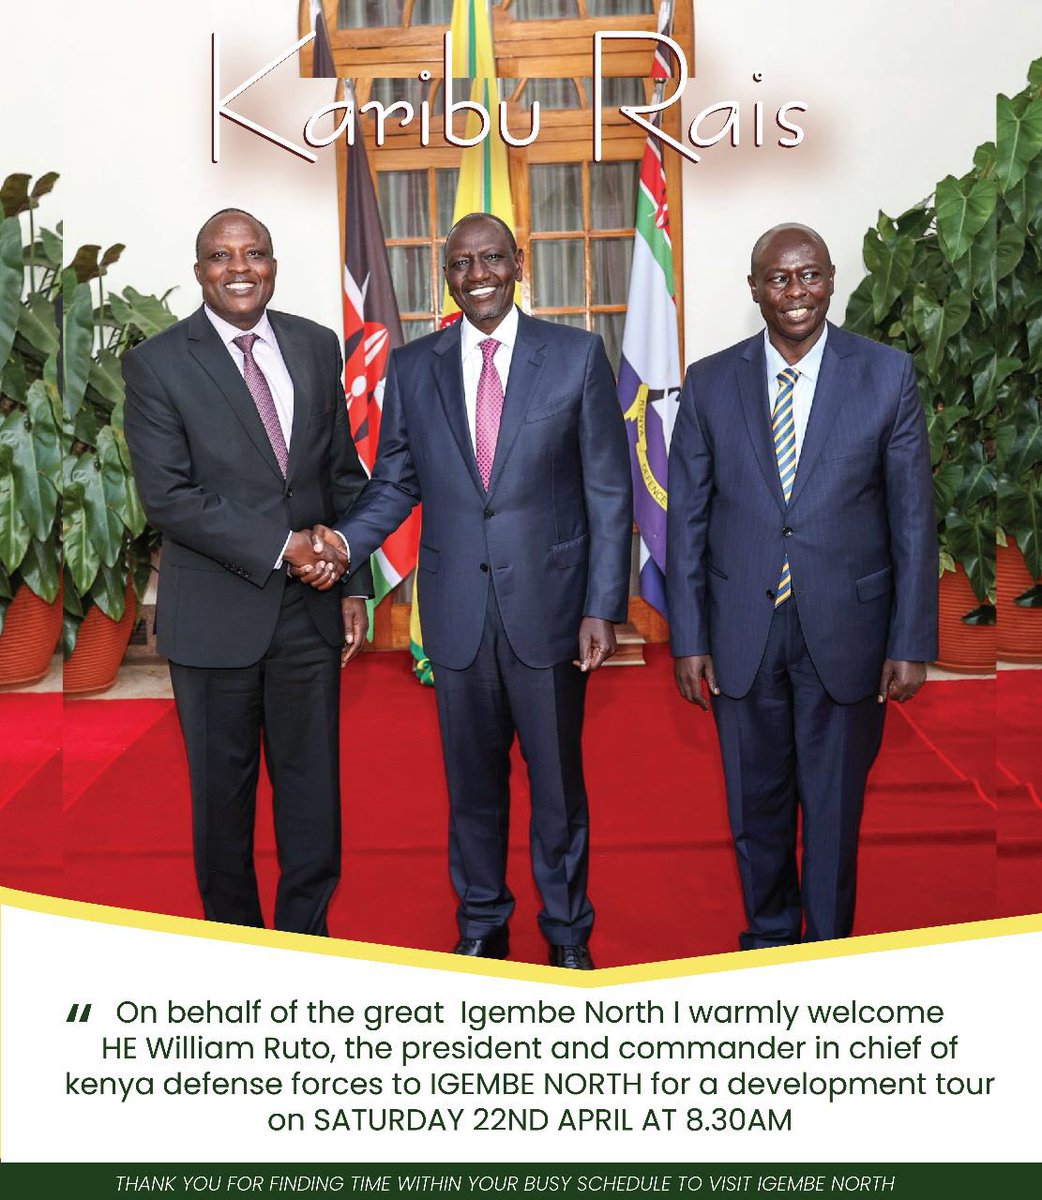 On behalf of INC, I would like to extend a warm welcome to H.E Dr. William Samoei Ruto and H.E Rigathi Gachagua for the upcoming development tour.